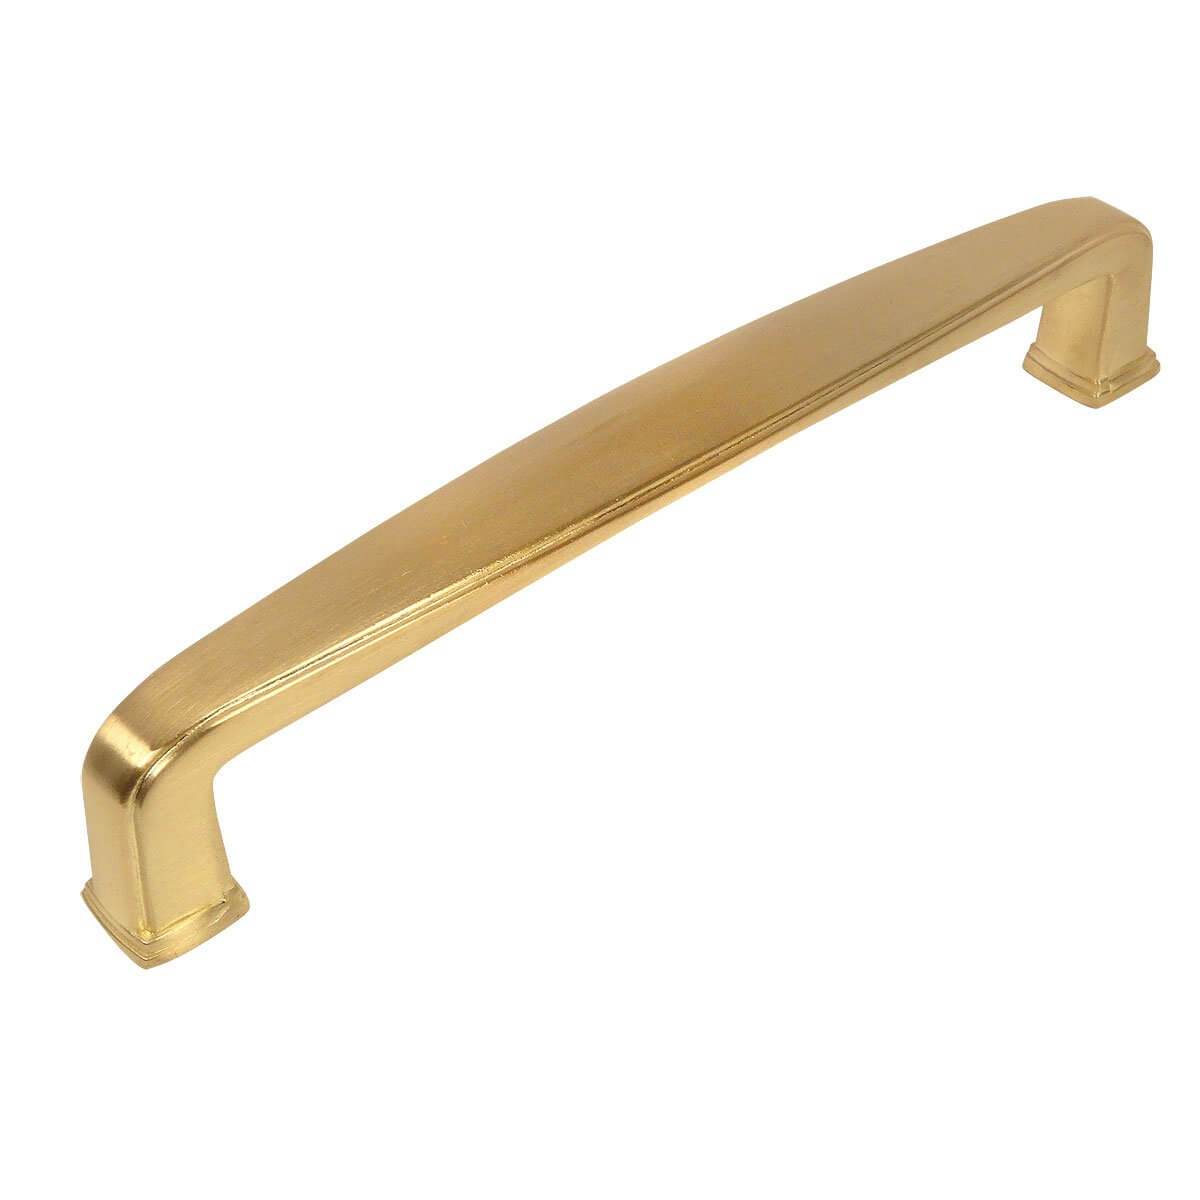 Brushed brass drawer pull with five inch hole spacing and elongated subtle wide design